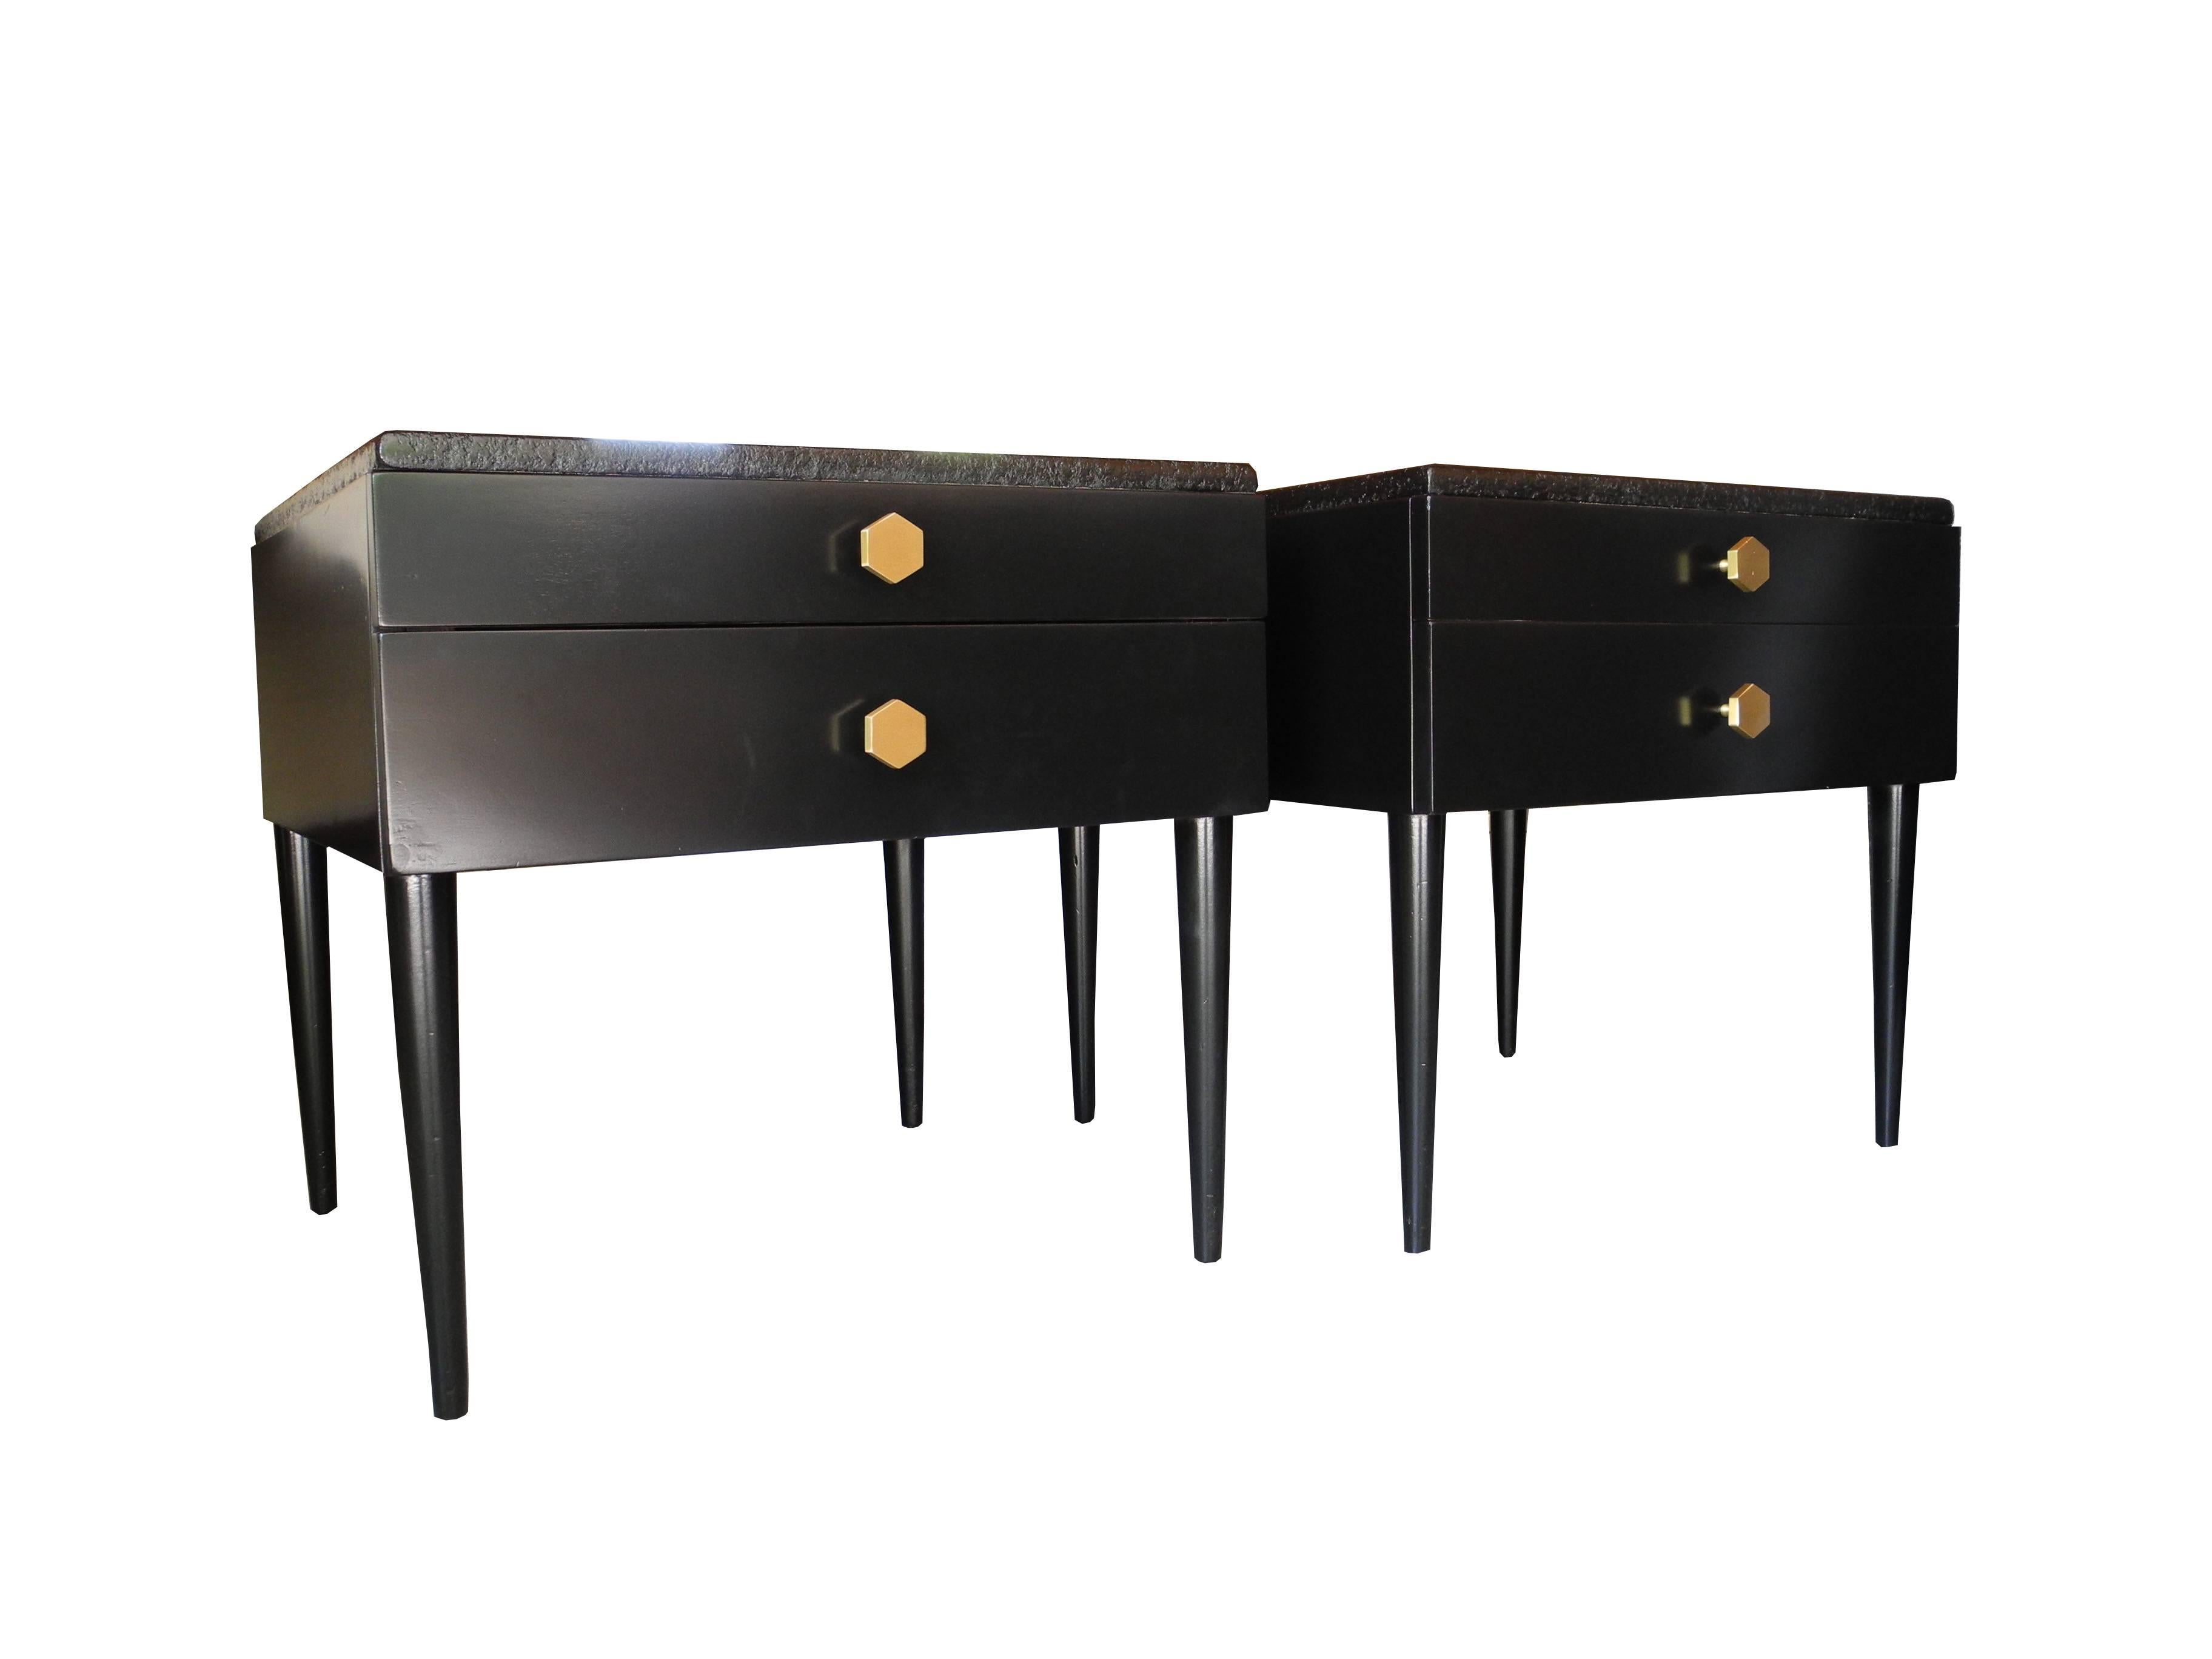 These modern vintage side tables which could be used as bedside tables are equipped with two drawers each that have solid brass hexagon knobs. The beautiful cork tops are unique to Paul Frankl's Mid-Century designs.